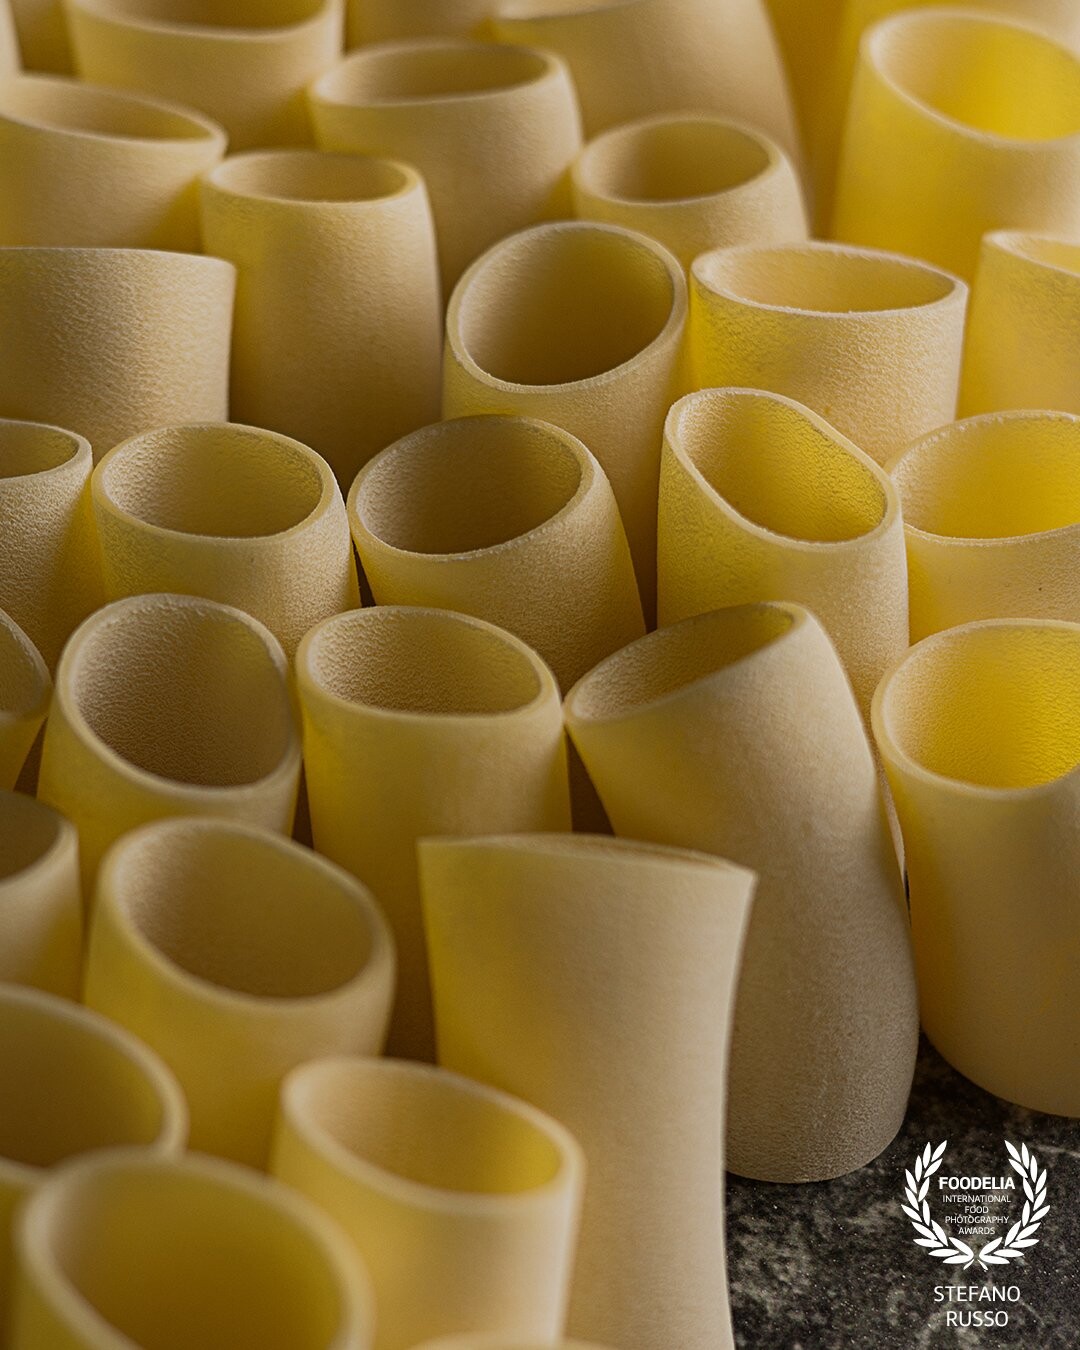 This photo is meant to highlight the texture of the pasta, paccheri di Gragnano, and shows a different point of view for viewing the pasta. One shot and one light. The pasta is from a major Italian manufacturer